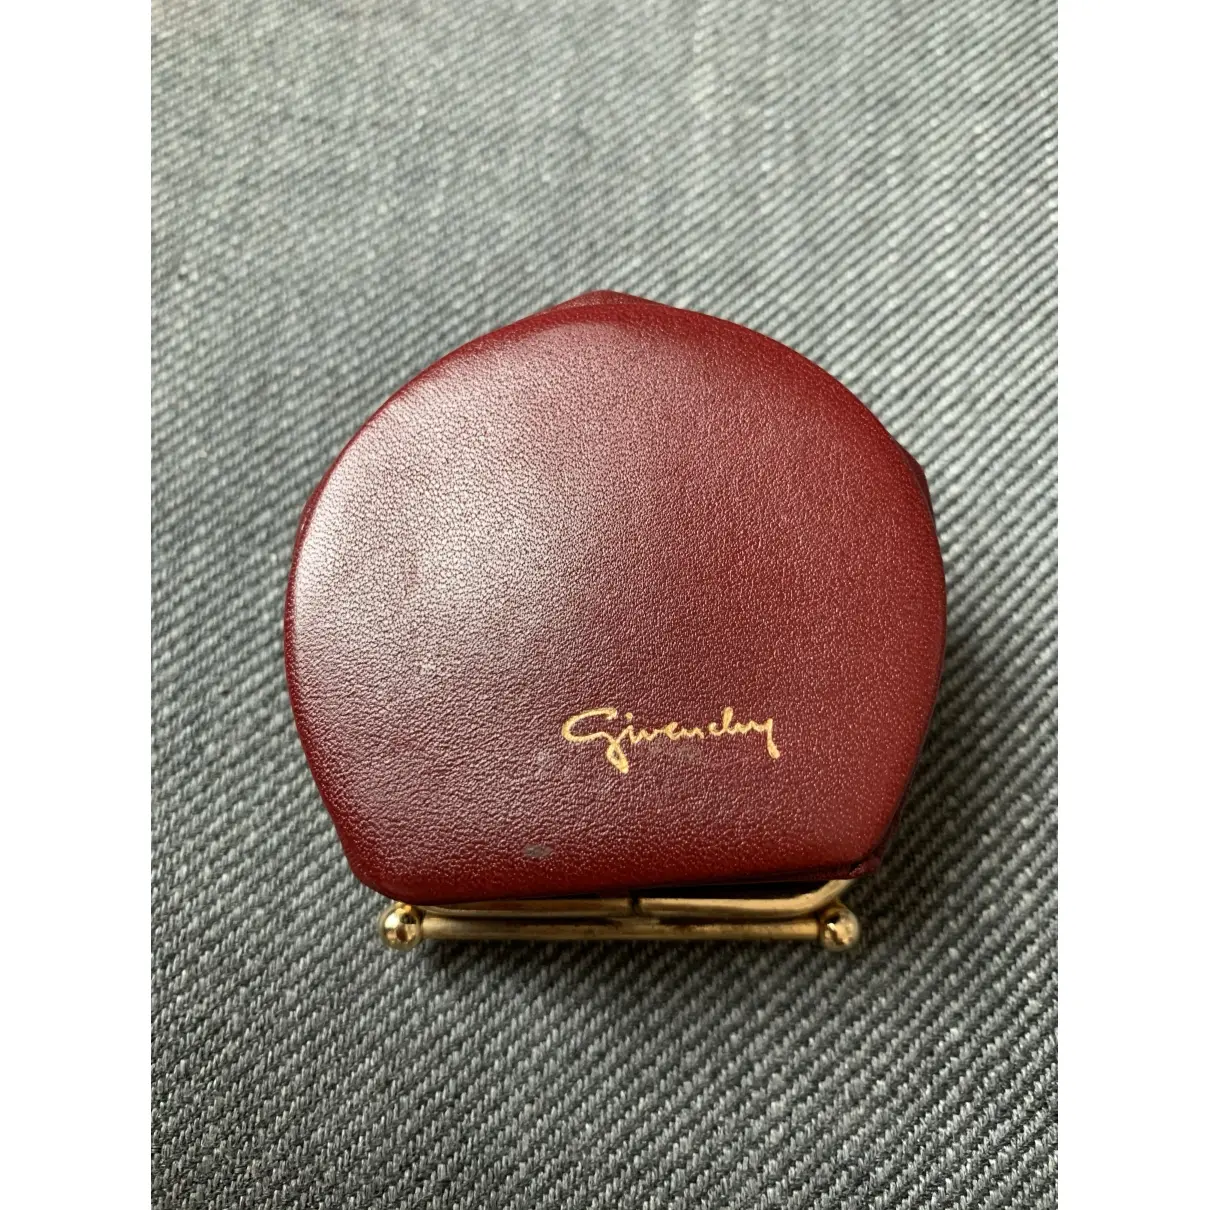 Givenchy Leather purse for sale - Vintage